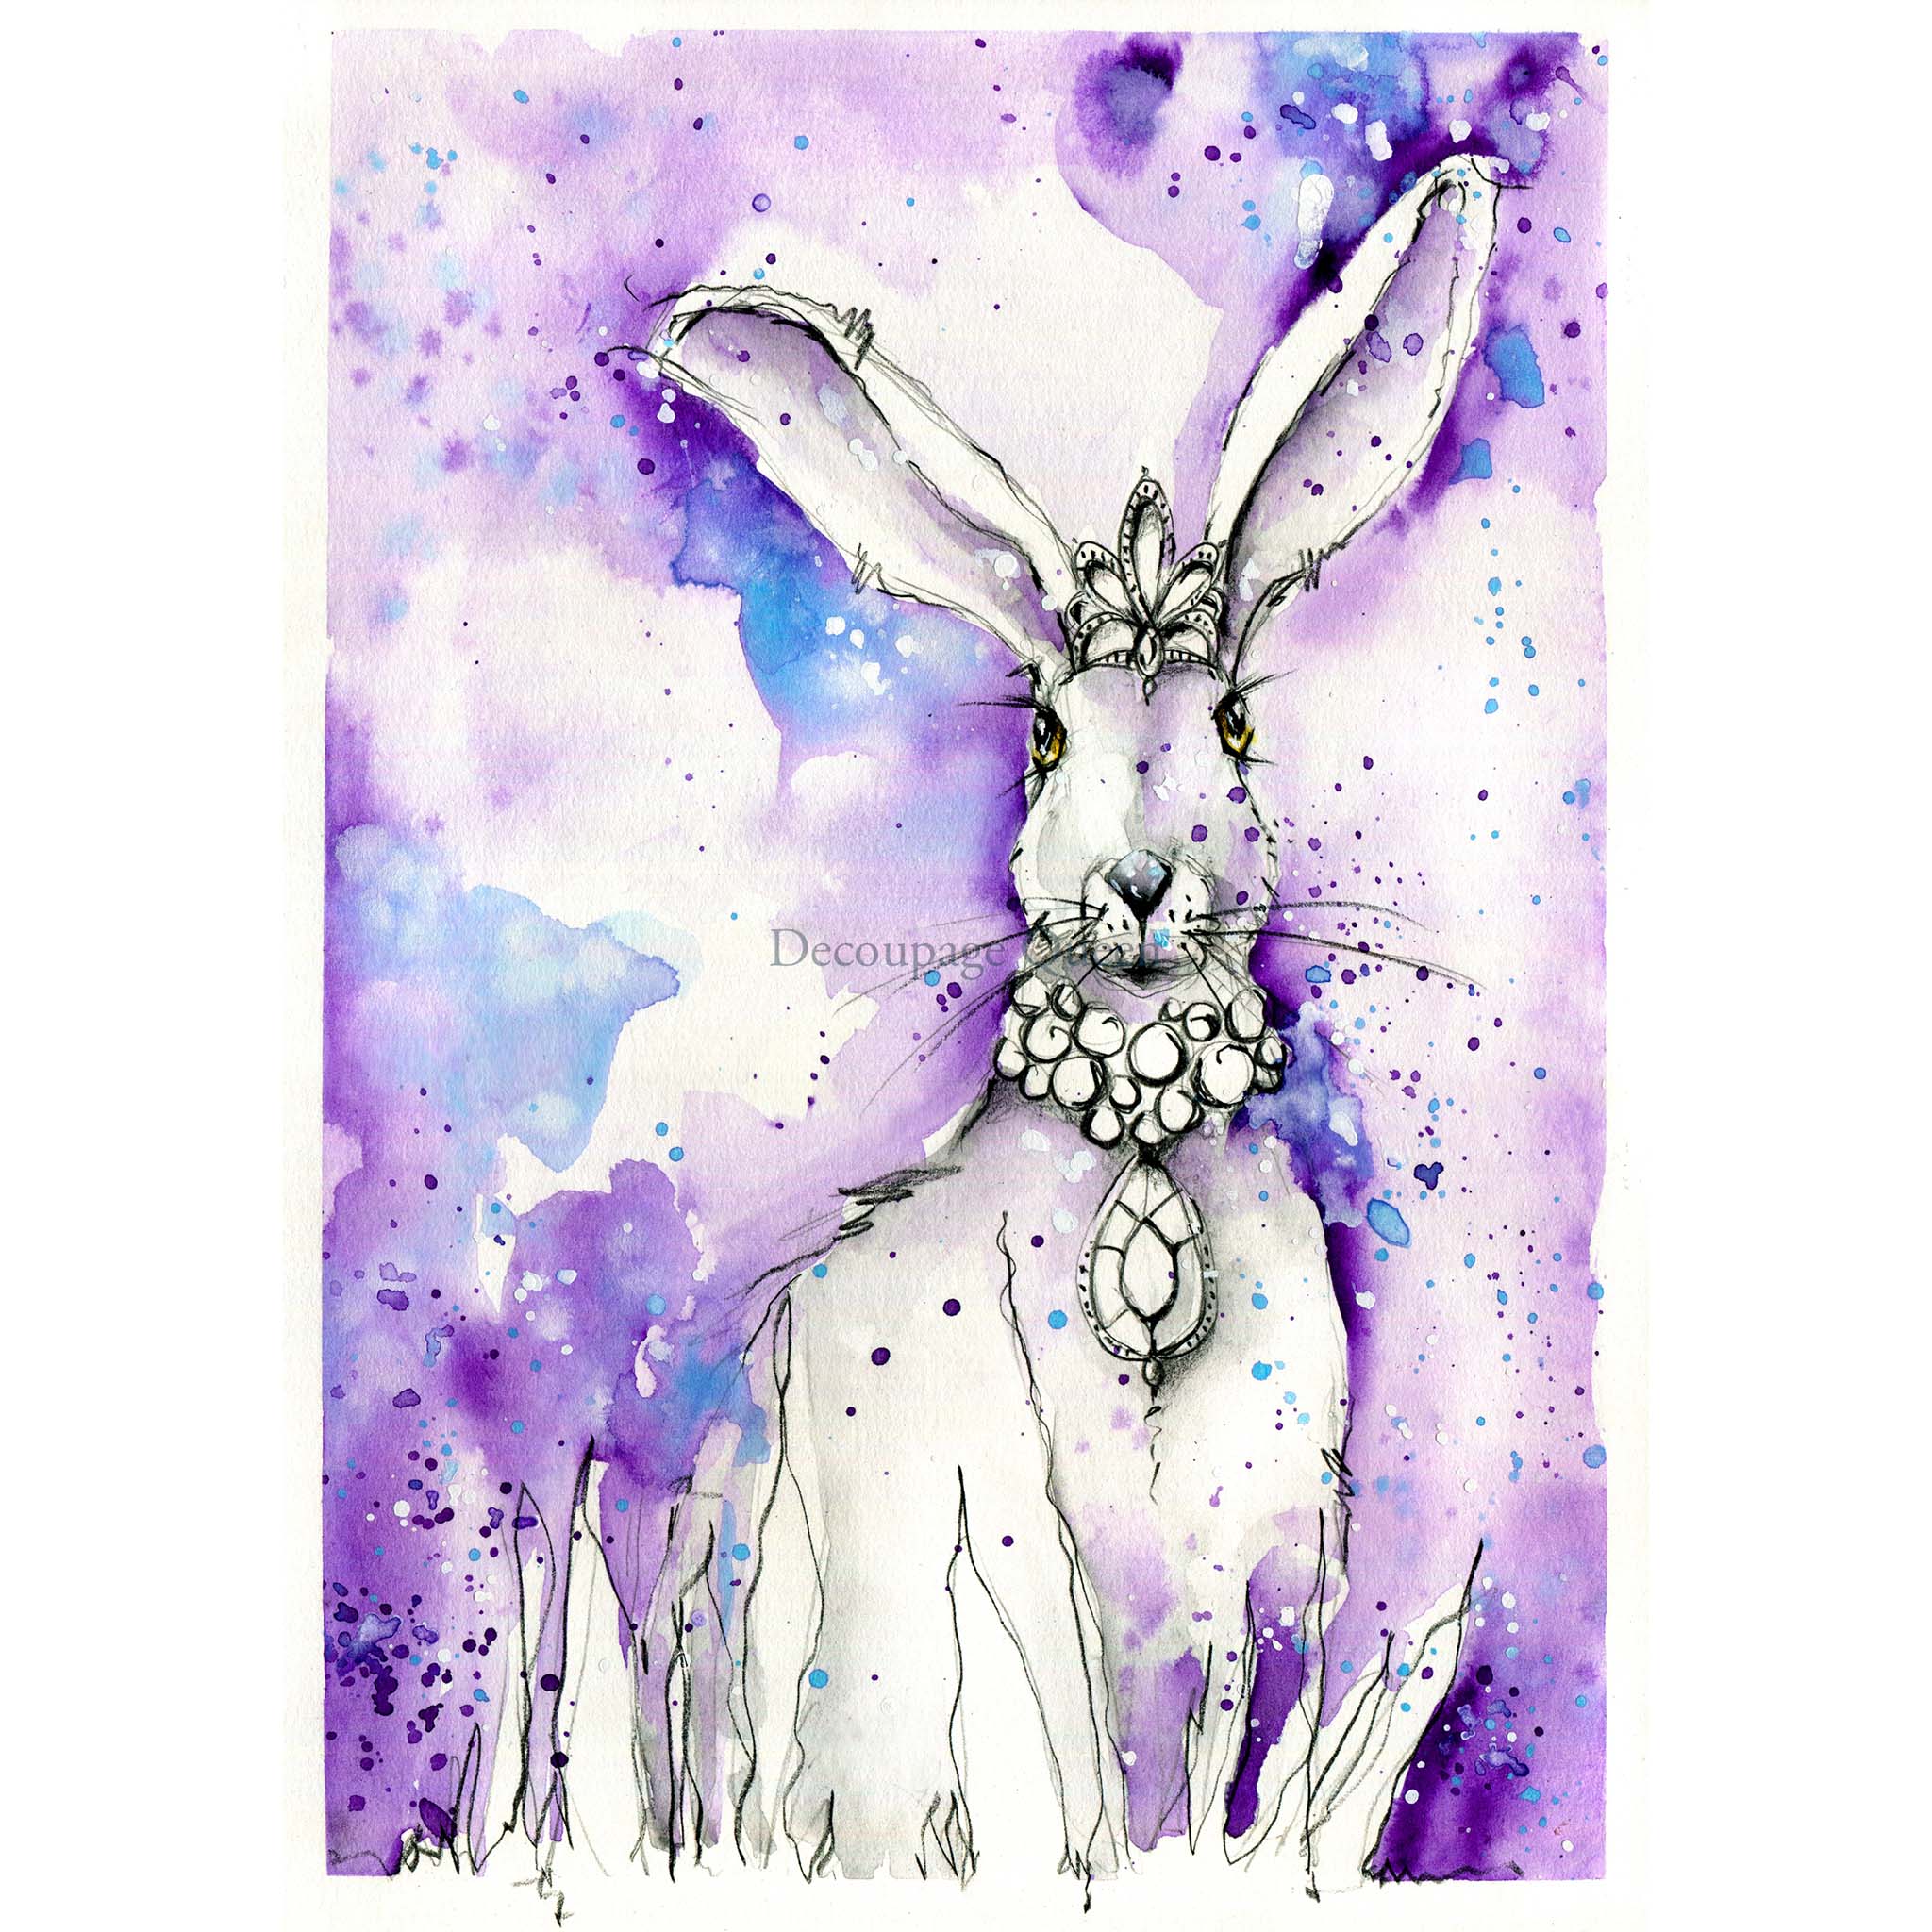 A3 rice paper design featuring a beautiful purple watercolor background adorned with a charming white rabbit wearing a crown and a dazzling jewel necklace is against a white background.